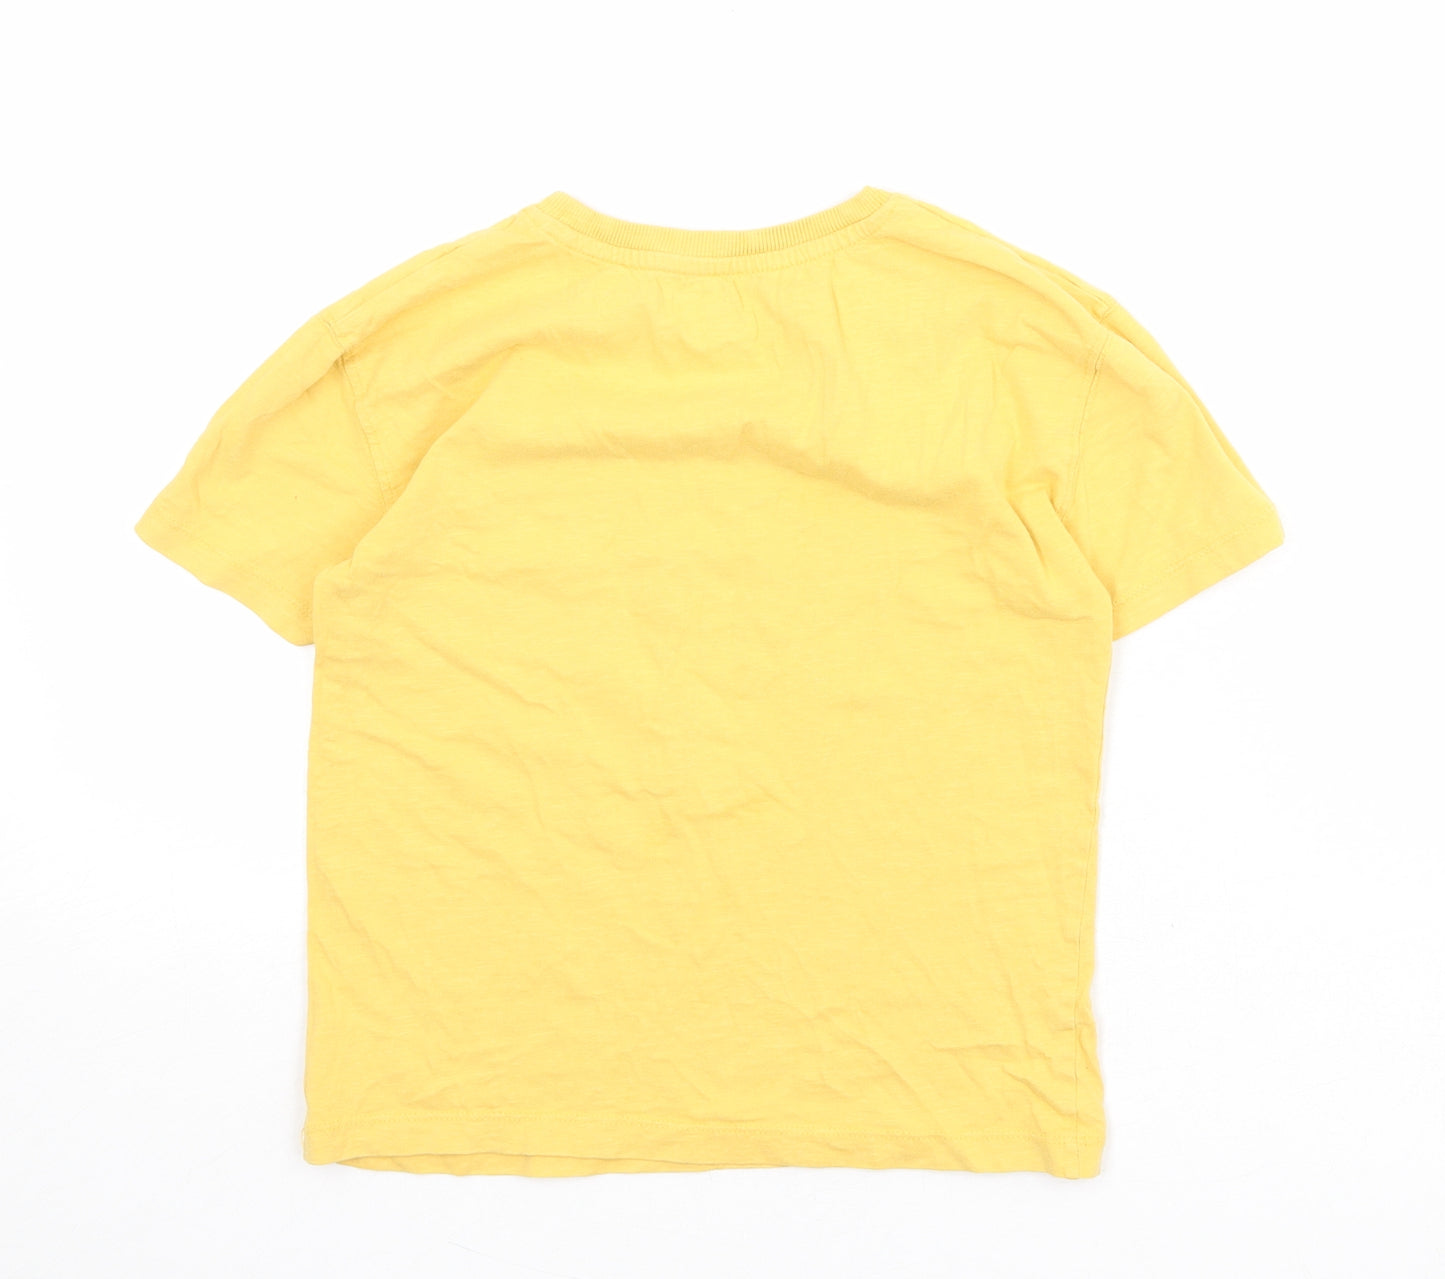 John Lewis Boys Yellow 100% Cotton Basic T-Shirt Size 9 Years Round Neck Pullover - Just Chilling Sloth